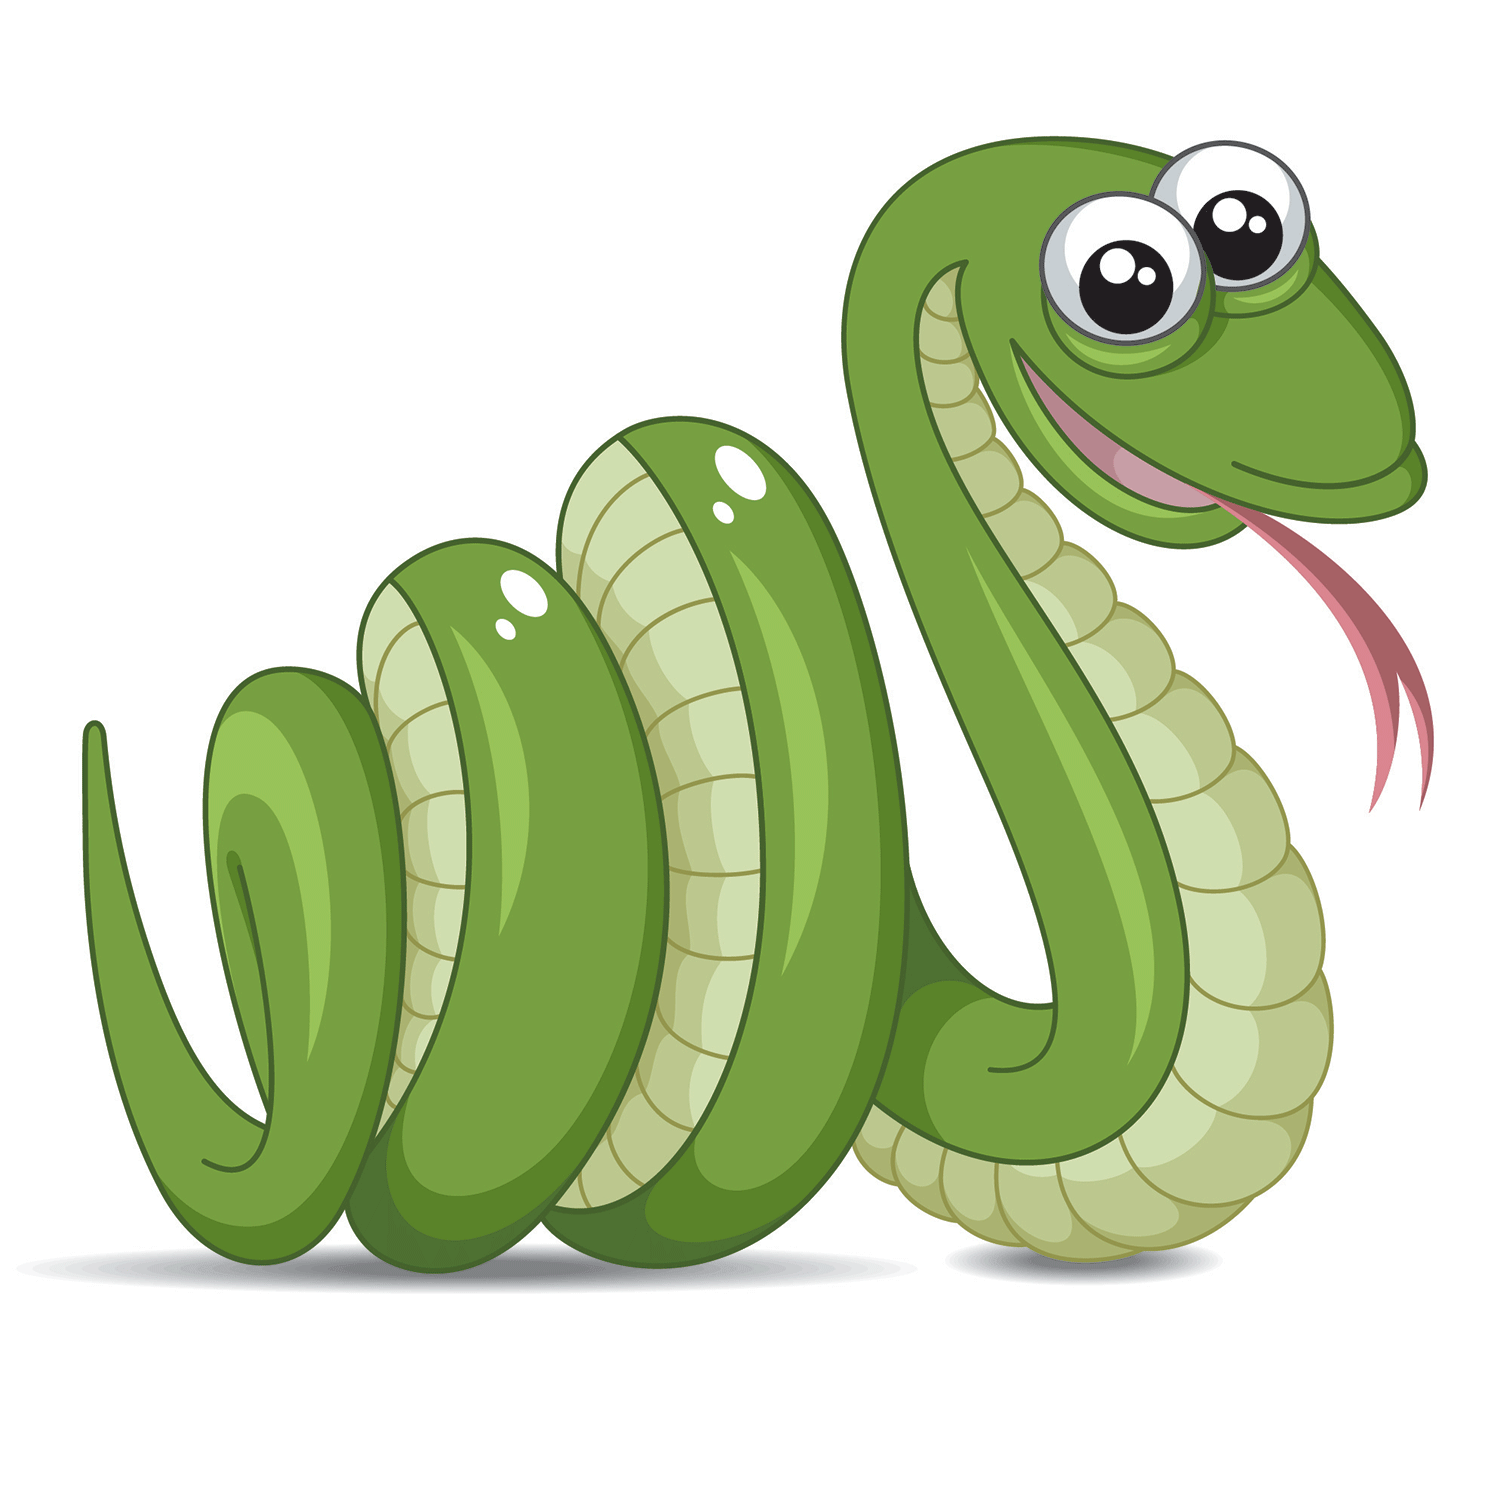 Animated Pictures Of Snakes - ClipArt Best